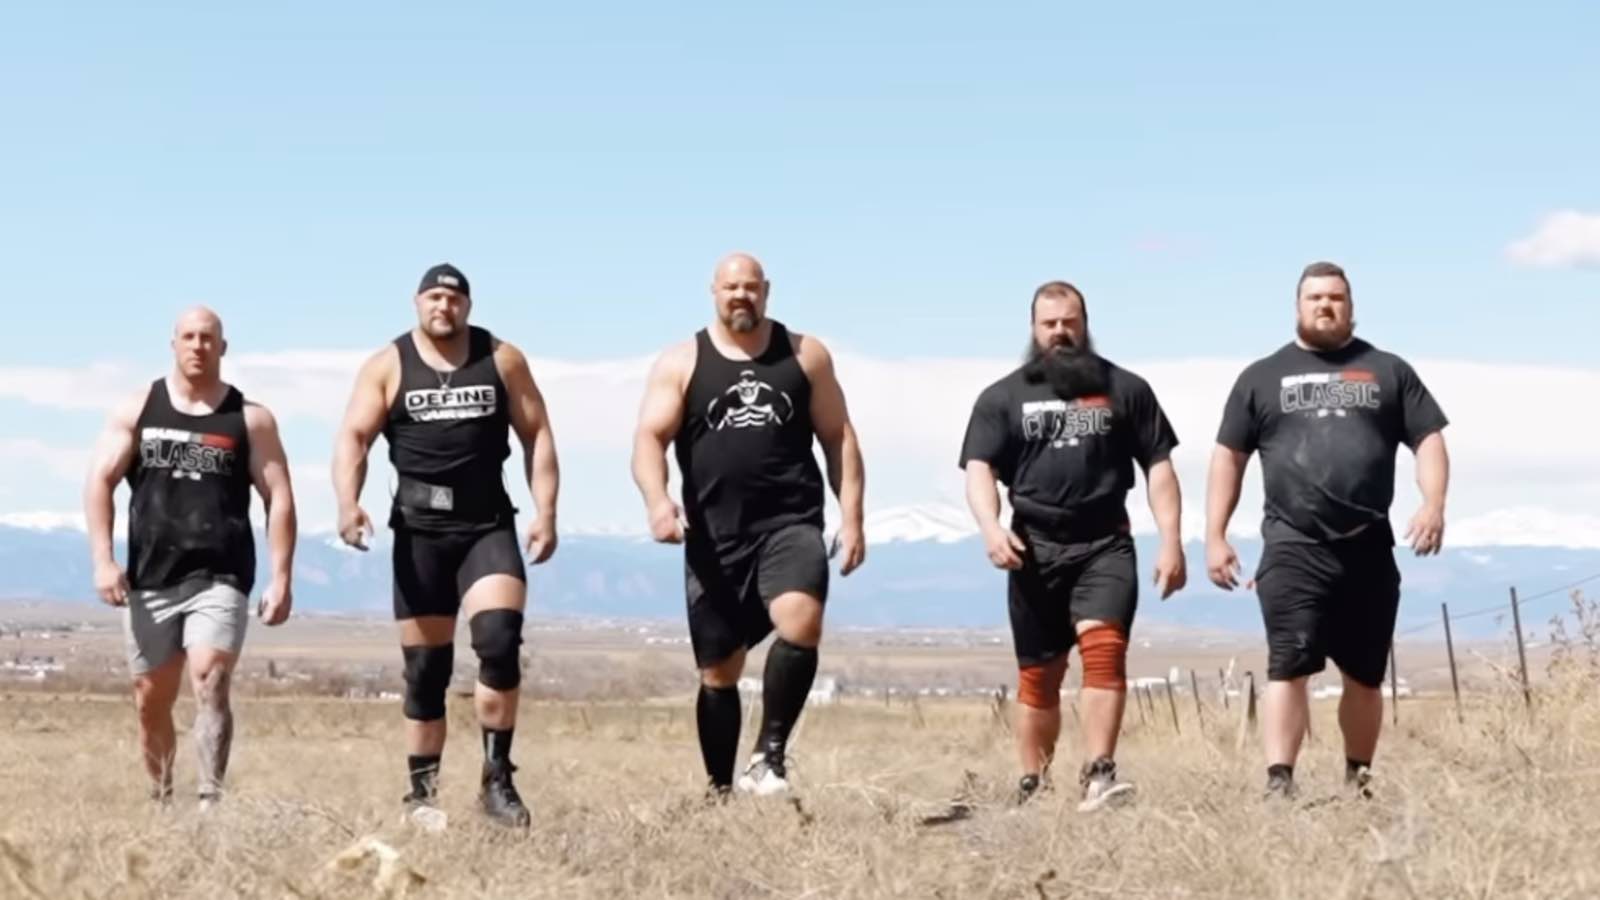 brian-shaw-led-5-american-strongmen-in-world's-strongest-man-training-session-–-breaking-muscle